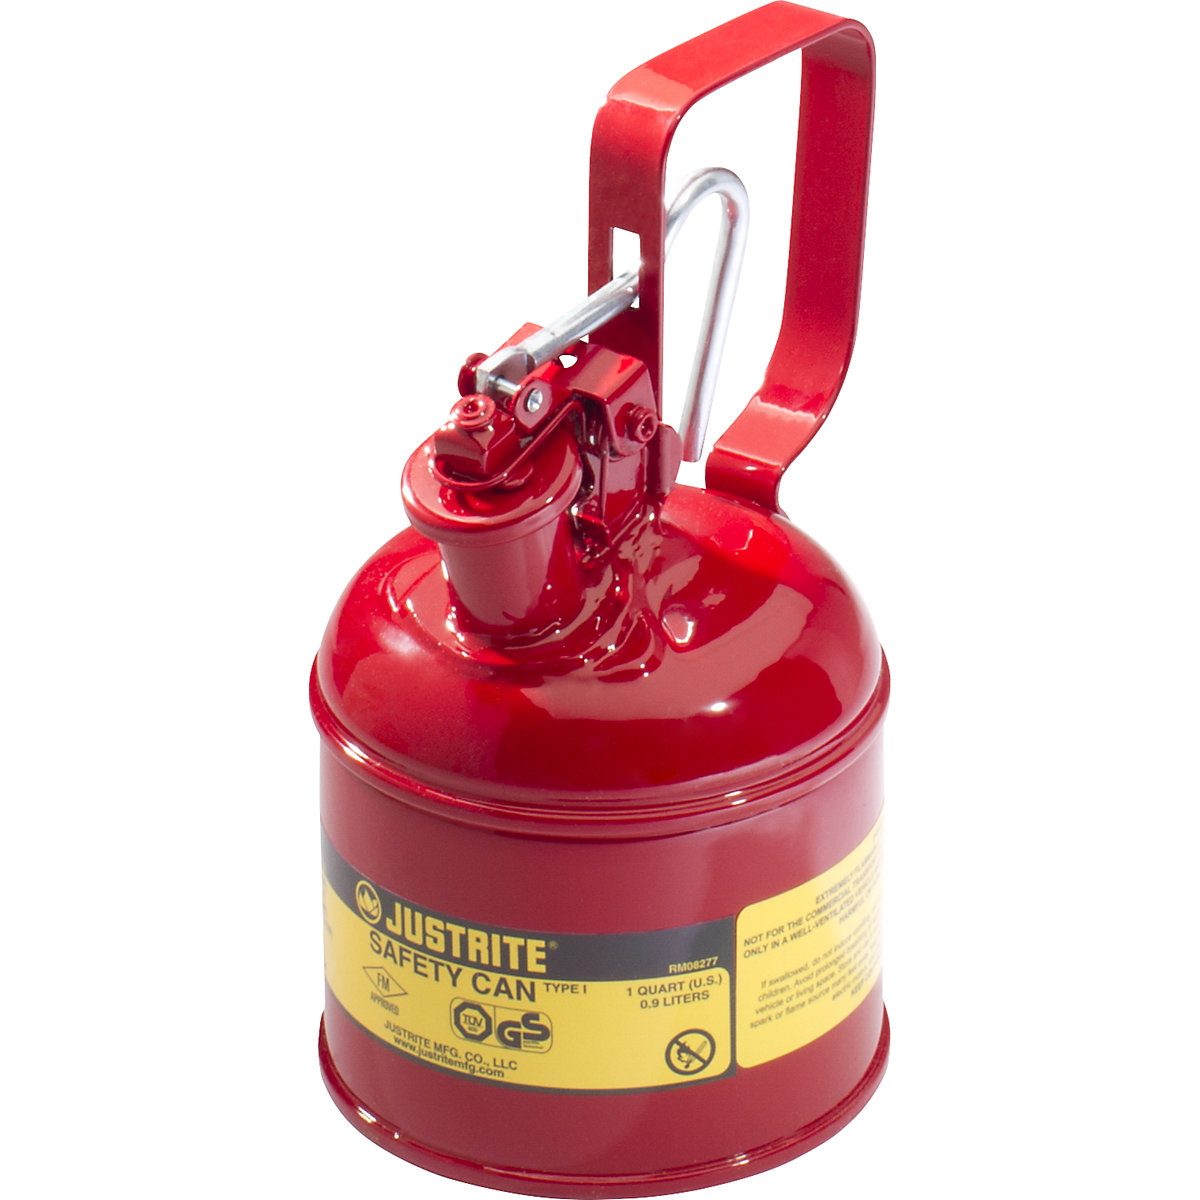 Steel safety container - Justrite